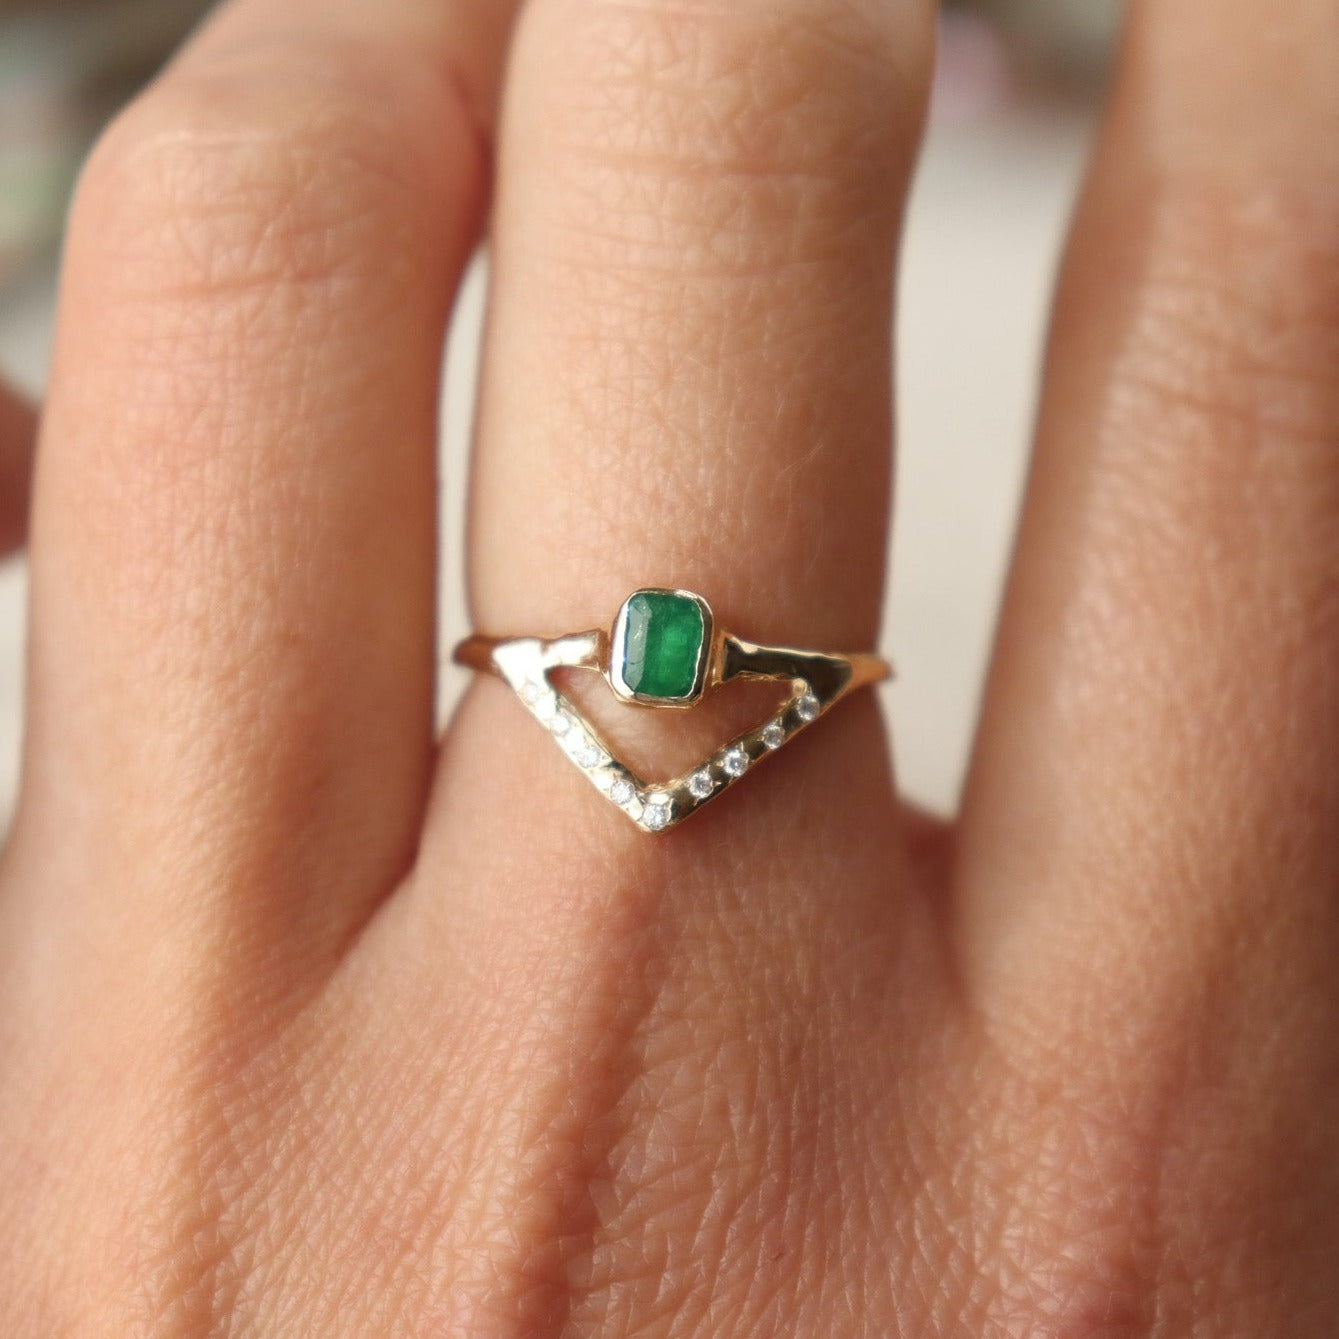 Stunning emerald ring with a bezel-set, rich green gemstone elegantly perched on a delicate, narrow band. Beneath it, a gracefully designed V-band features organically set diamonds, adding a touch of nature-inspired luxury to your jewelry collection. Worn on a hand to show scale.